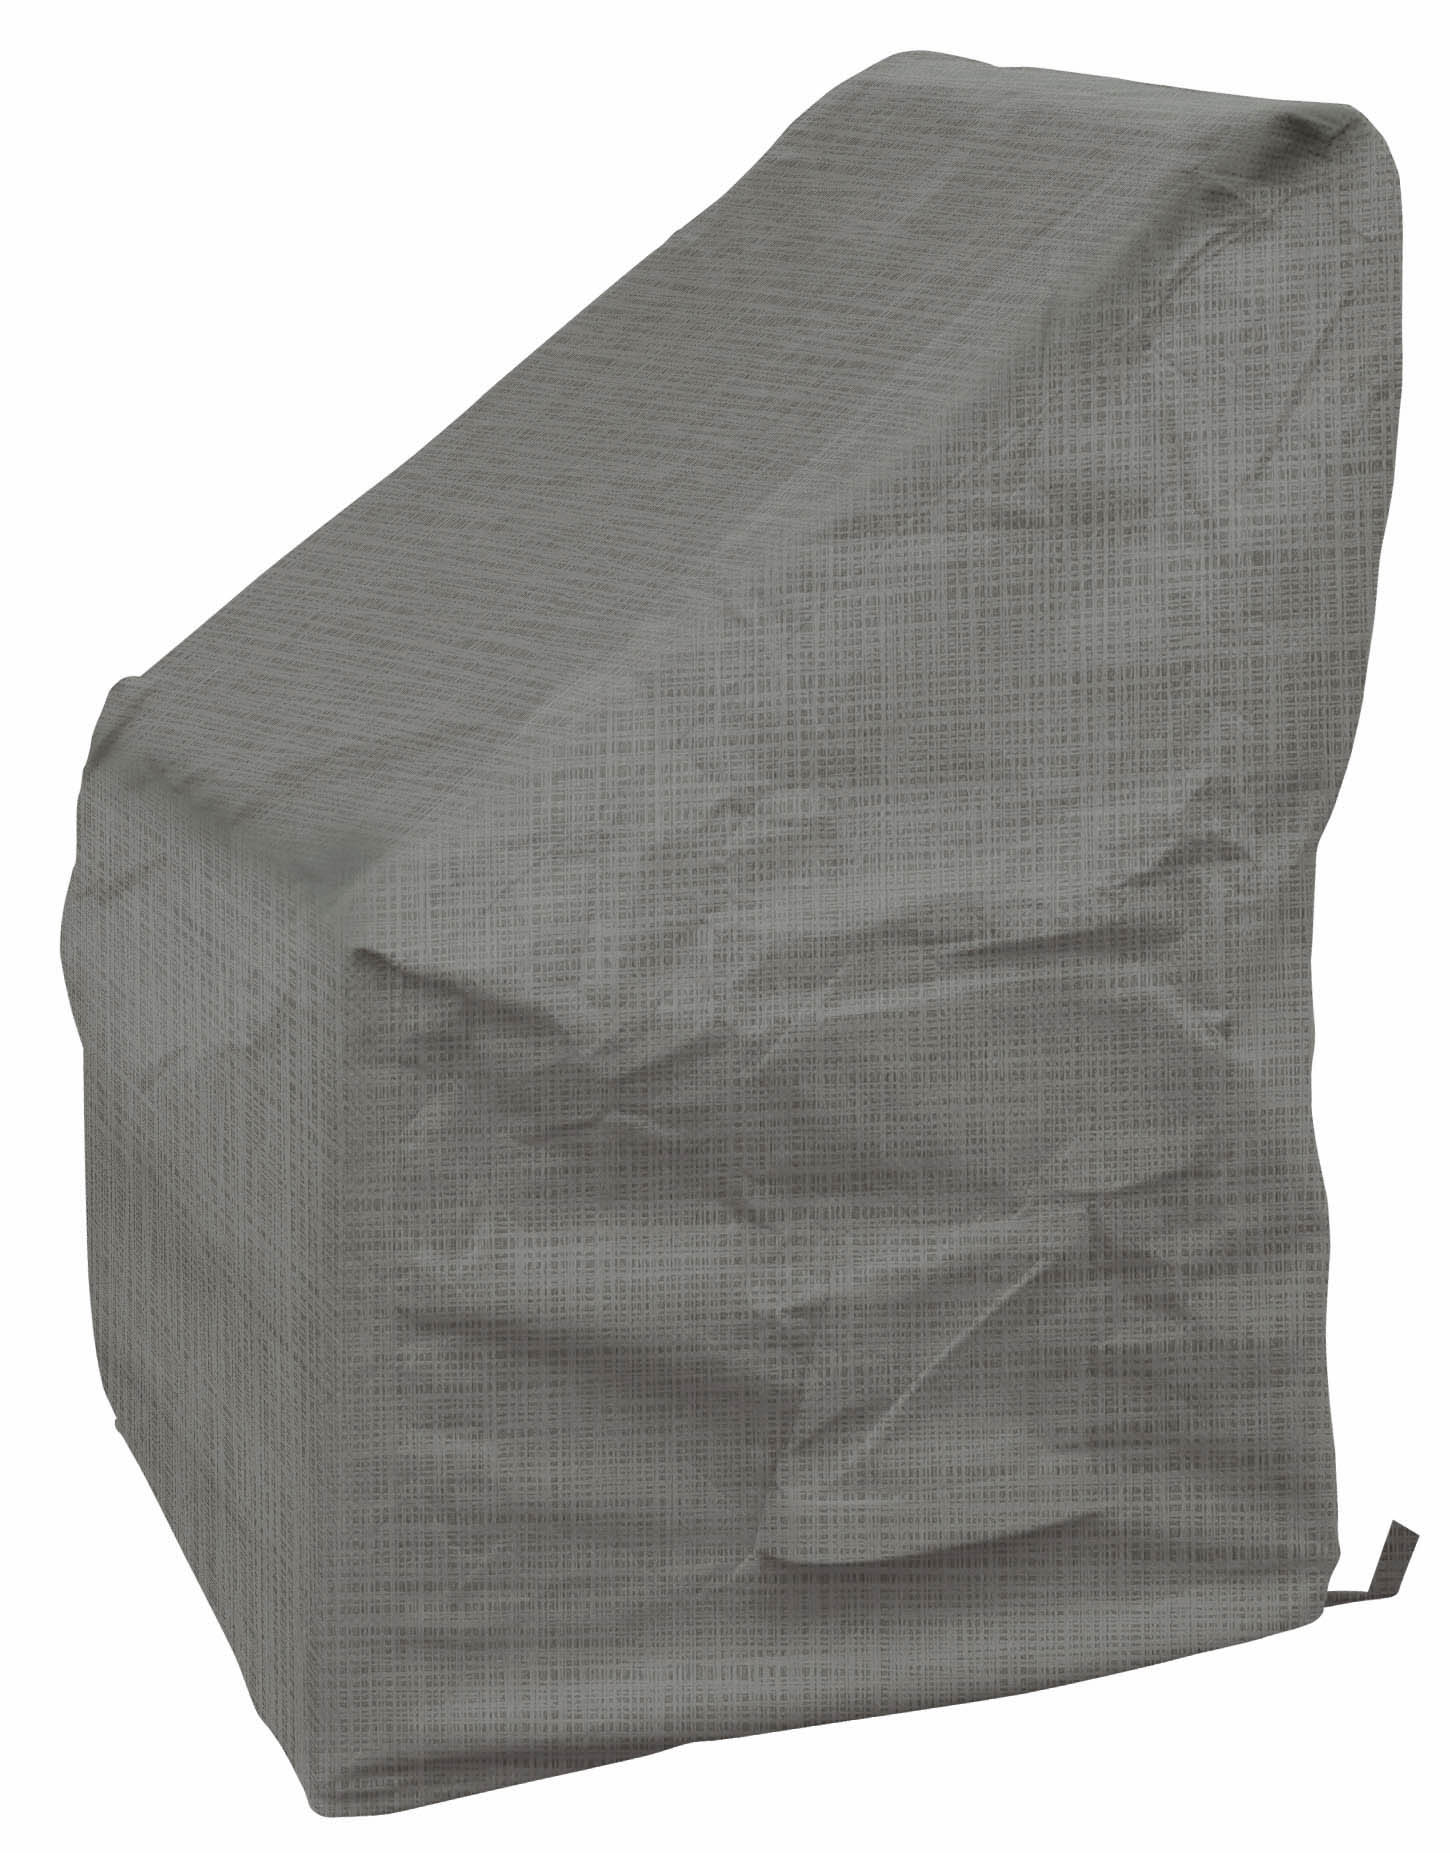 Protective cover lounge chair 78 x 75 H: 90 cm